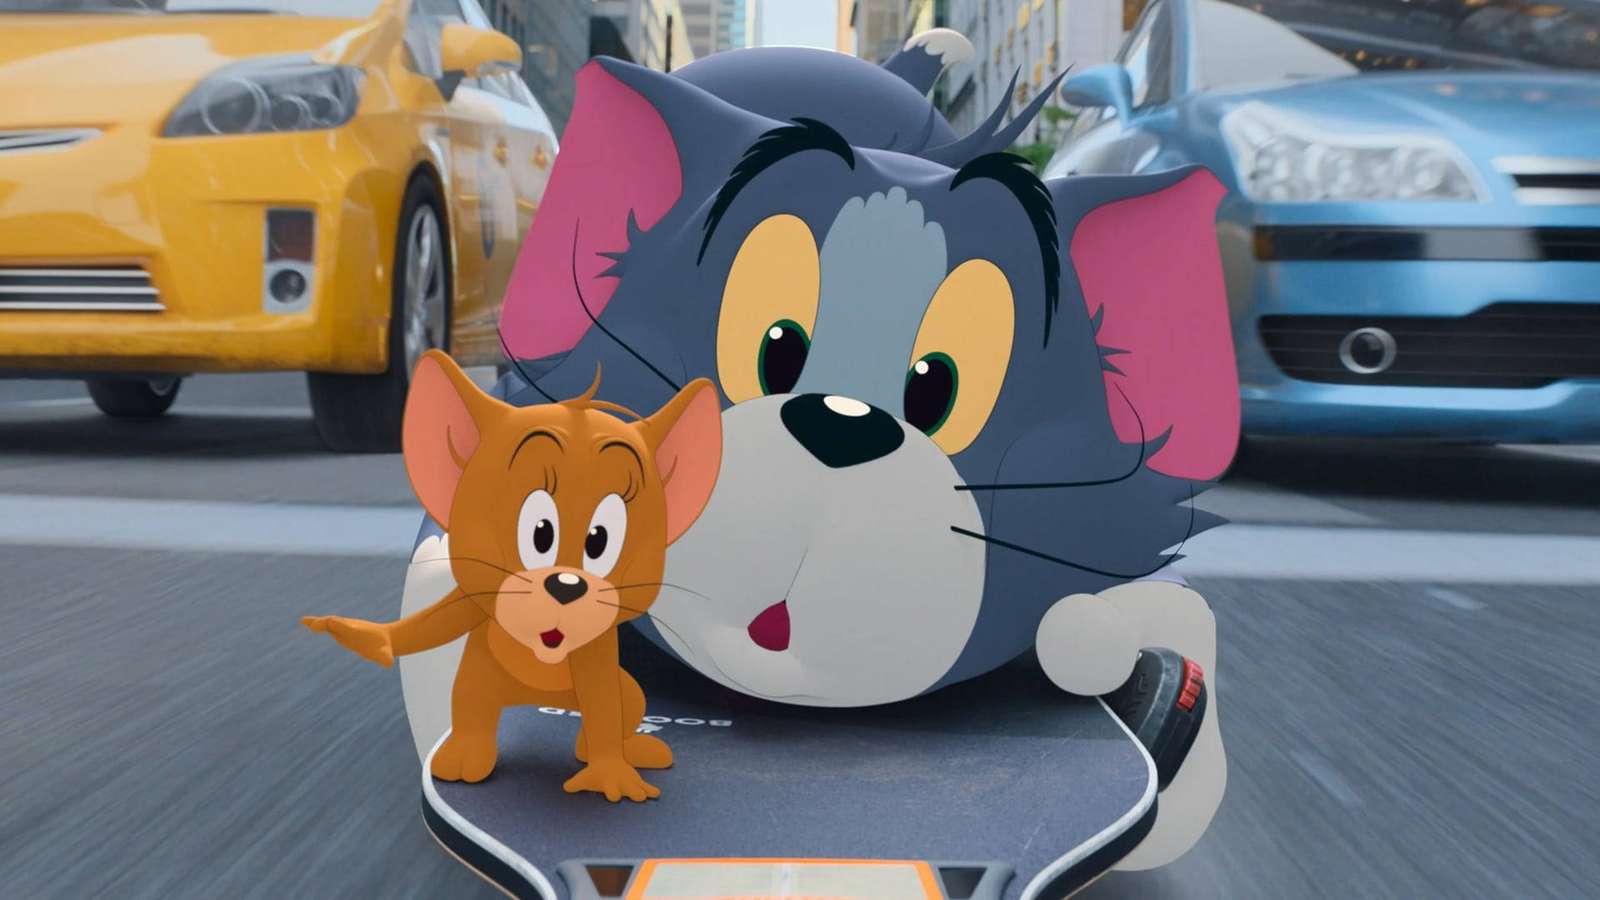 Tom si Jerry puzzle online